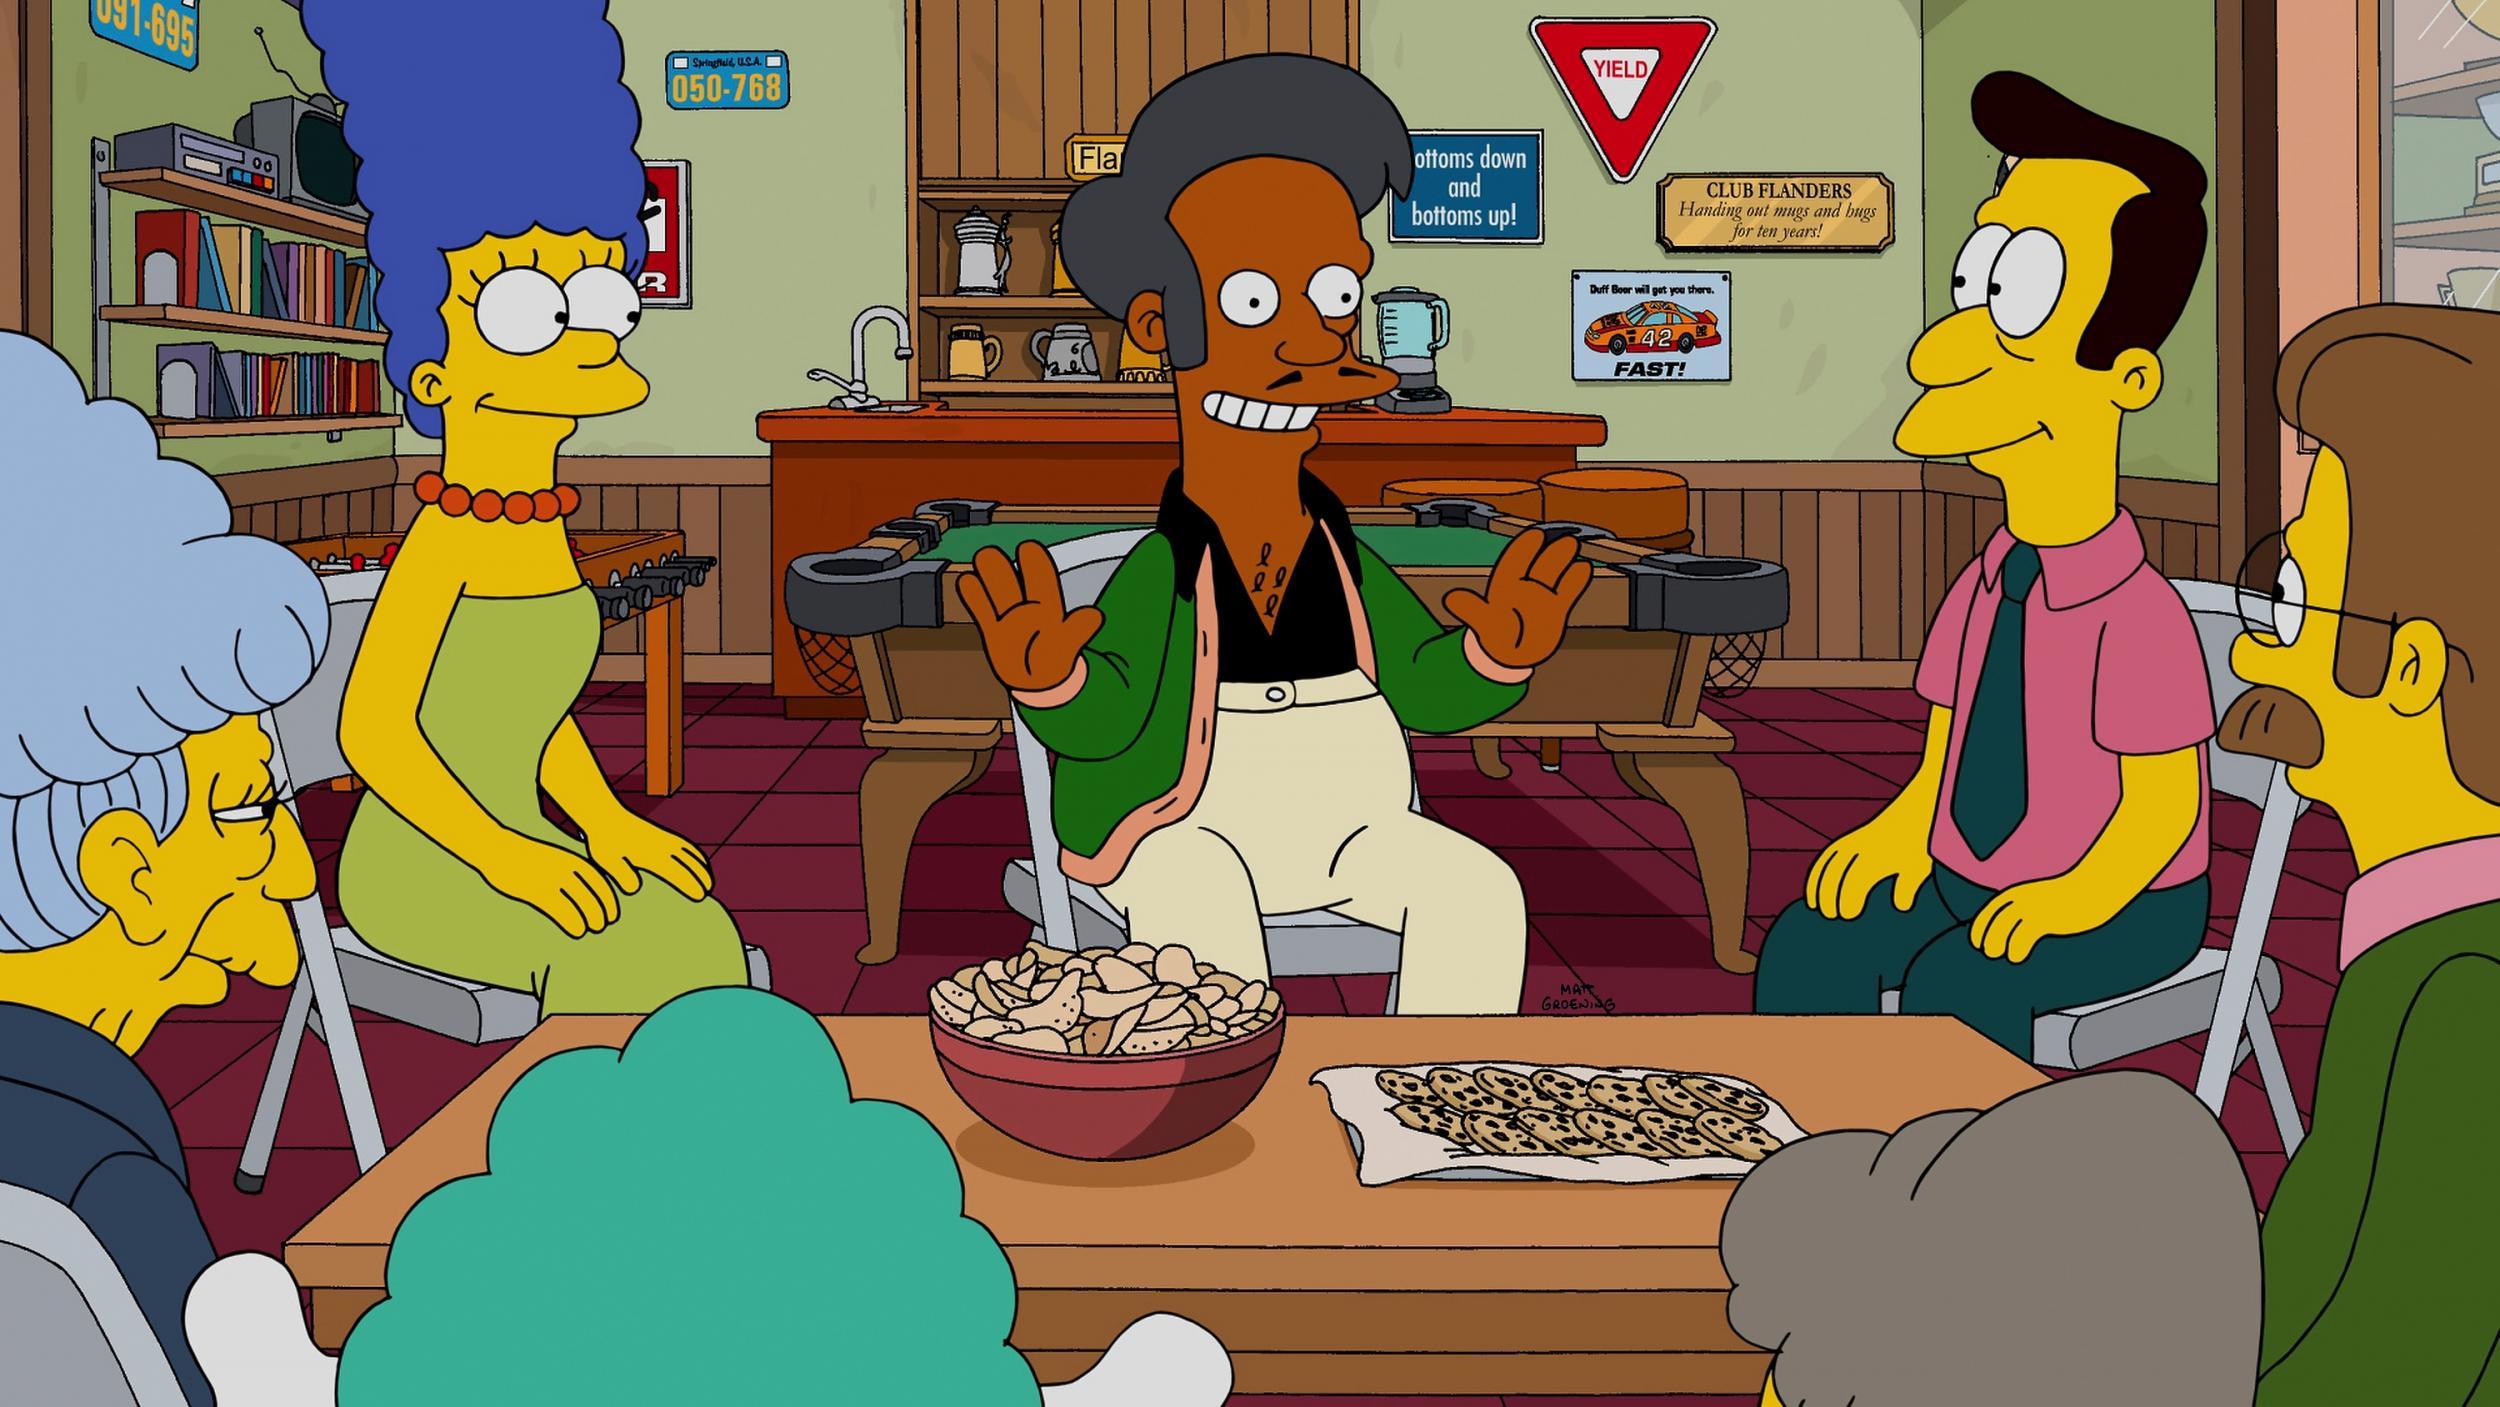 Fox CEO Trusts The Producers Of 'The Simpsons' To Handle The Apu  Controversy Themselves